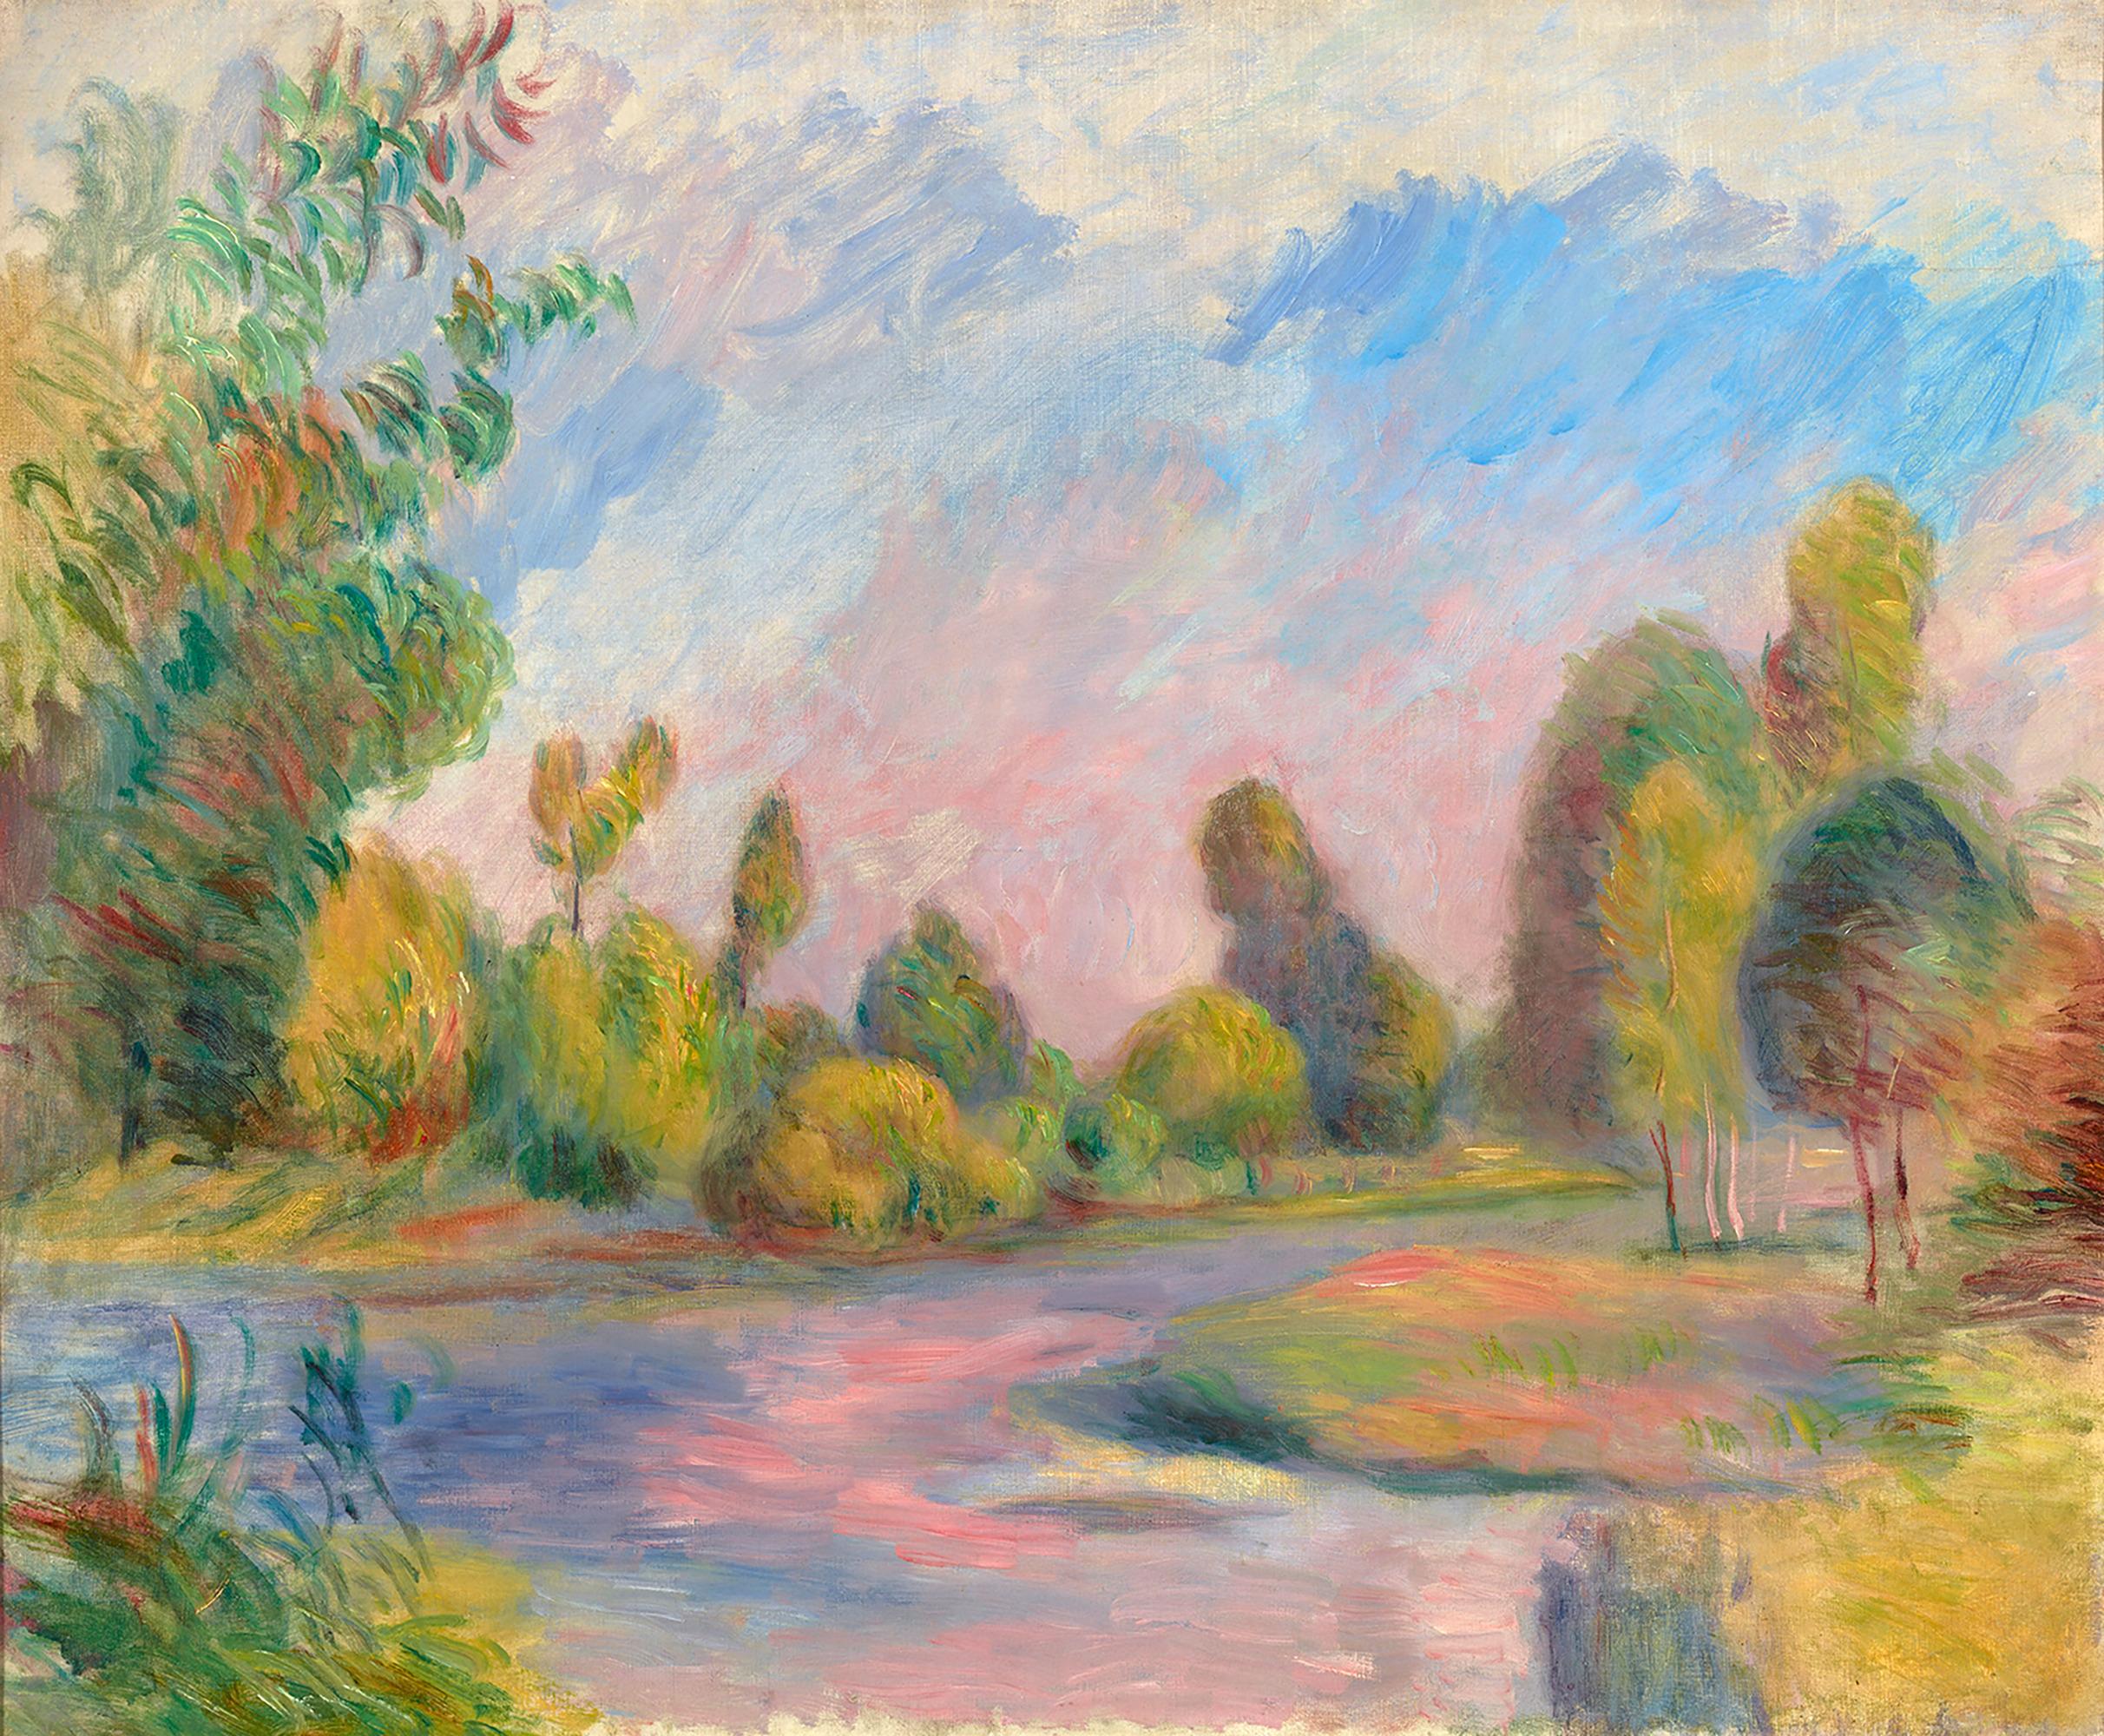 What painting did Auguste Renoir do?